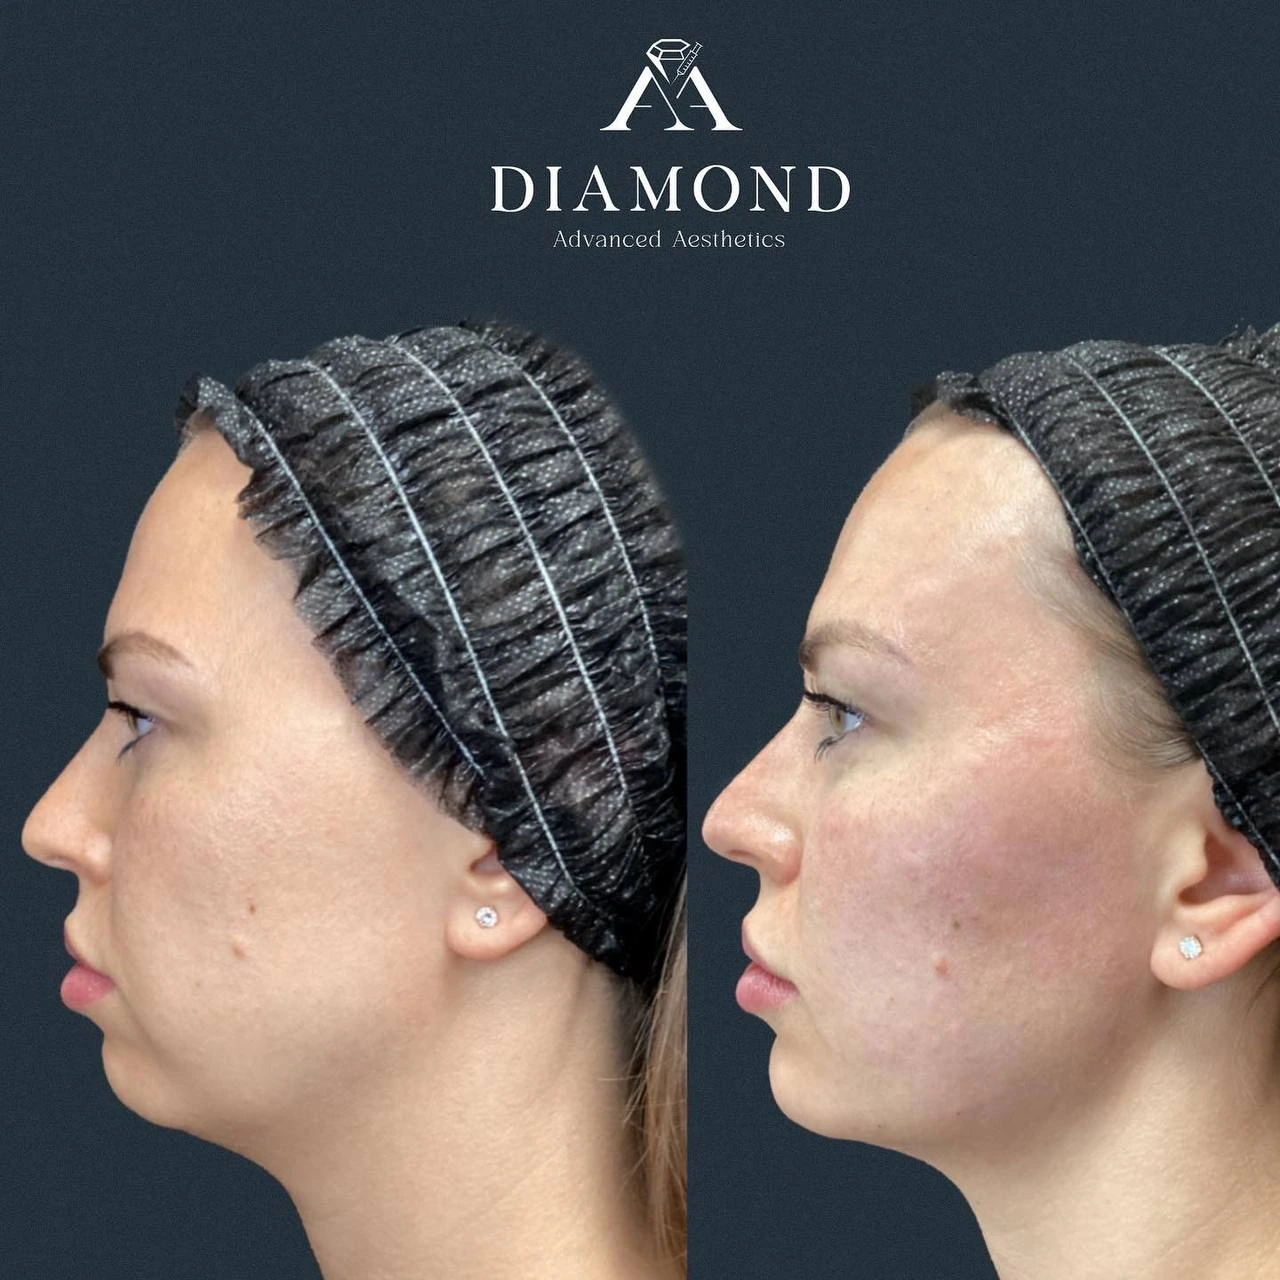 Before and After |diamond advanced aesthetics | New york |